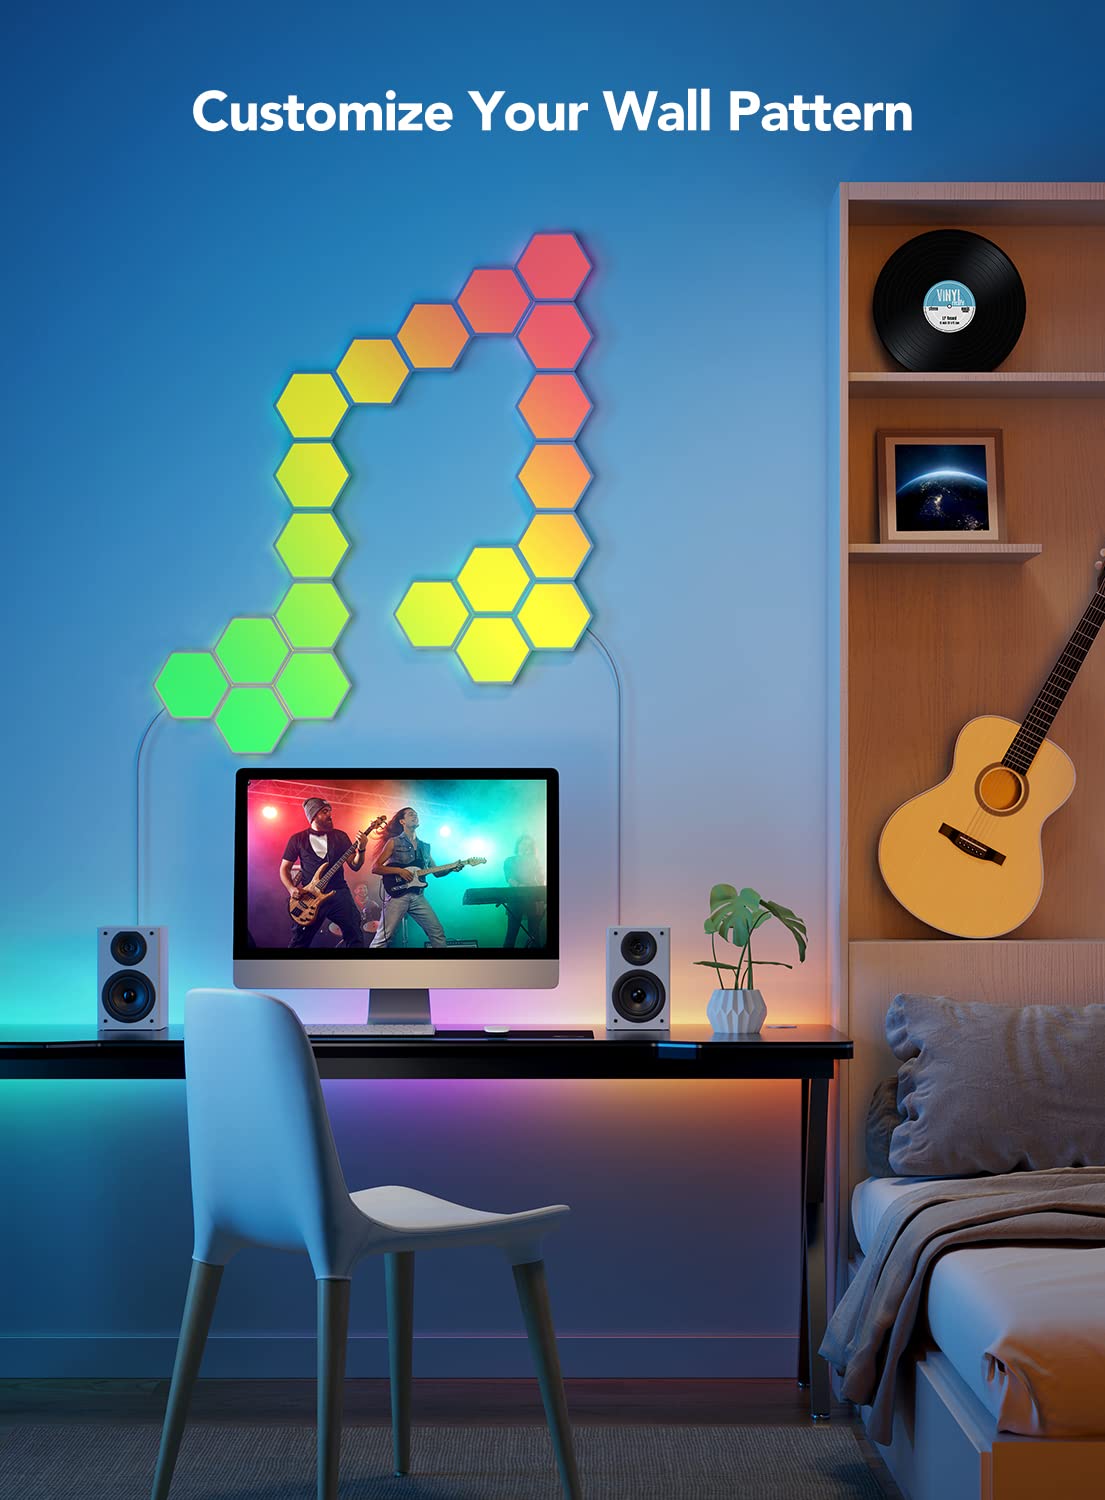 Govee Hexagon Light Panels, Smart LED, Glide Hexa RGBIC Wall Lights with Music Sync & Scene Modes, Work with Alexa & Google Assistant for Gaming Room, Bedroom, Living Room Decor, 7 Pack